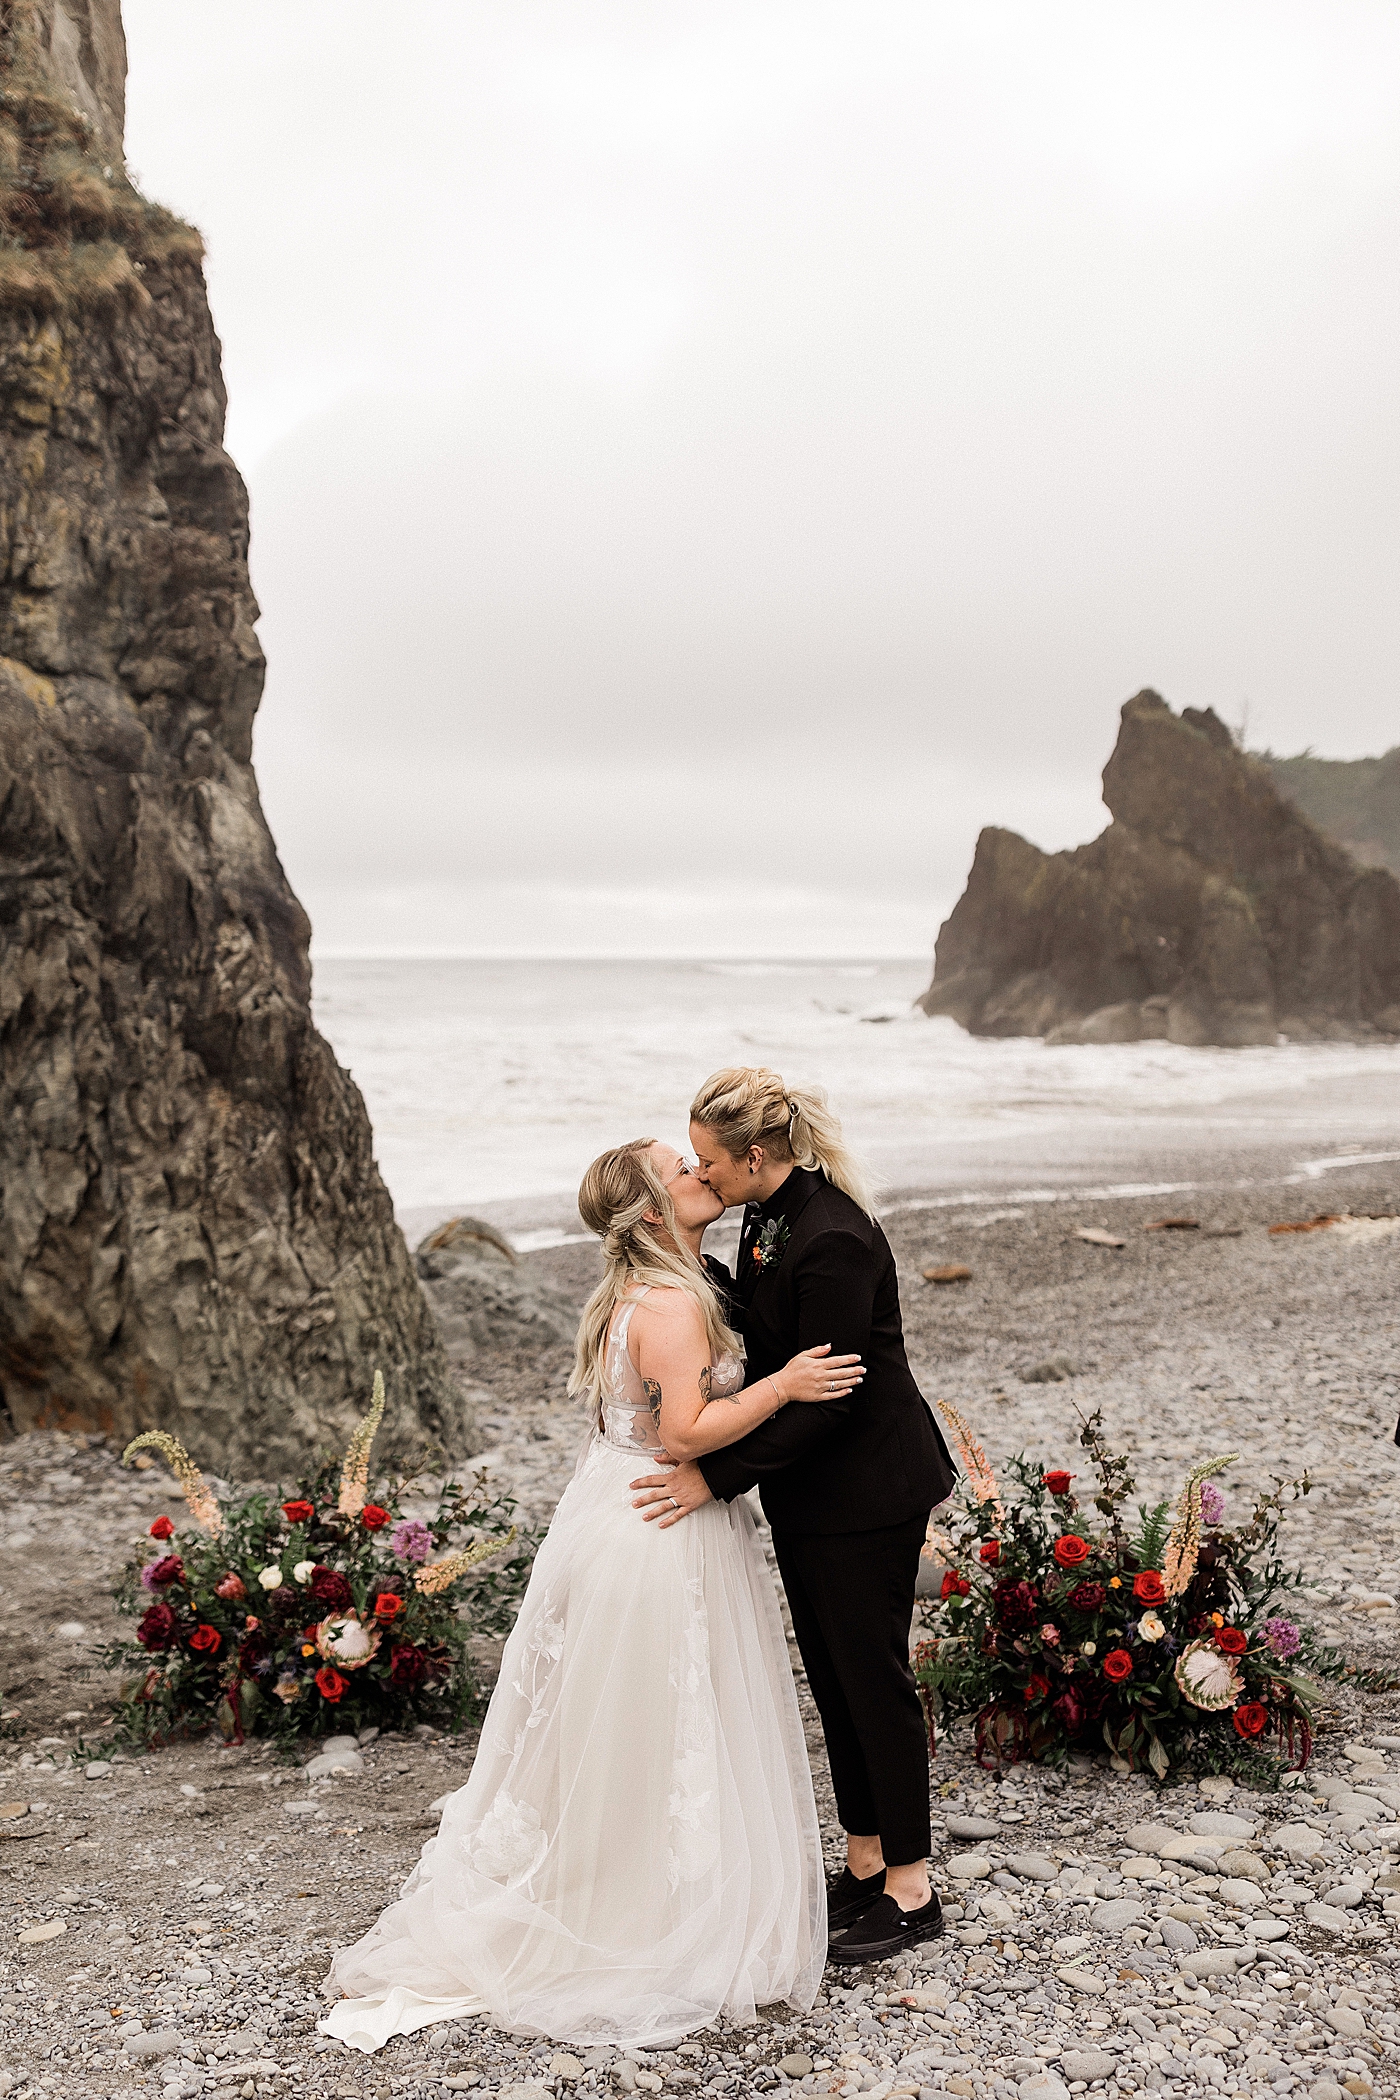 Bride's first kiss during same-sex elopement | Photo by Megan Montalvo Photography.